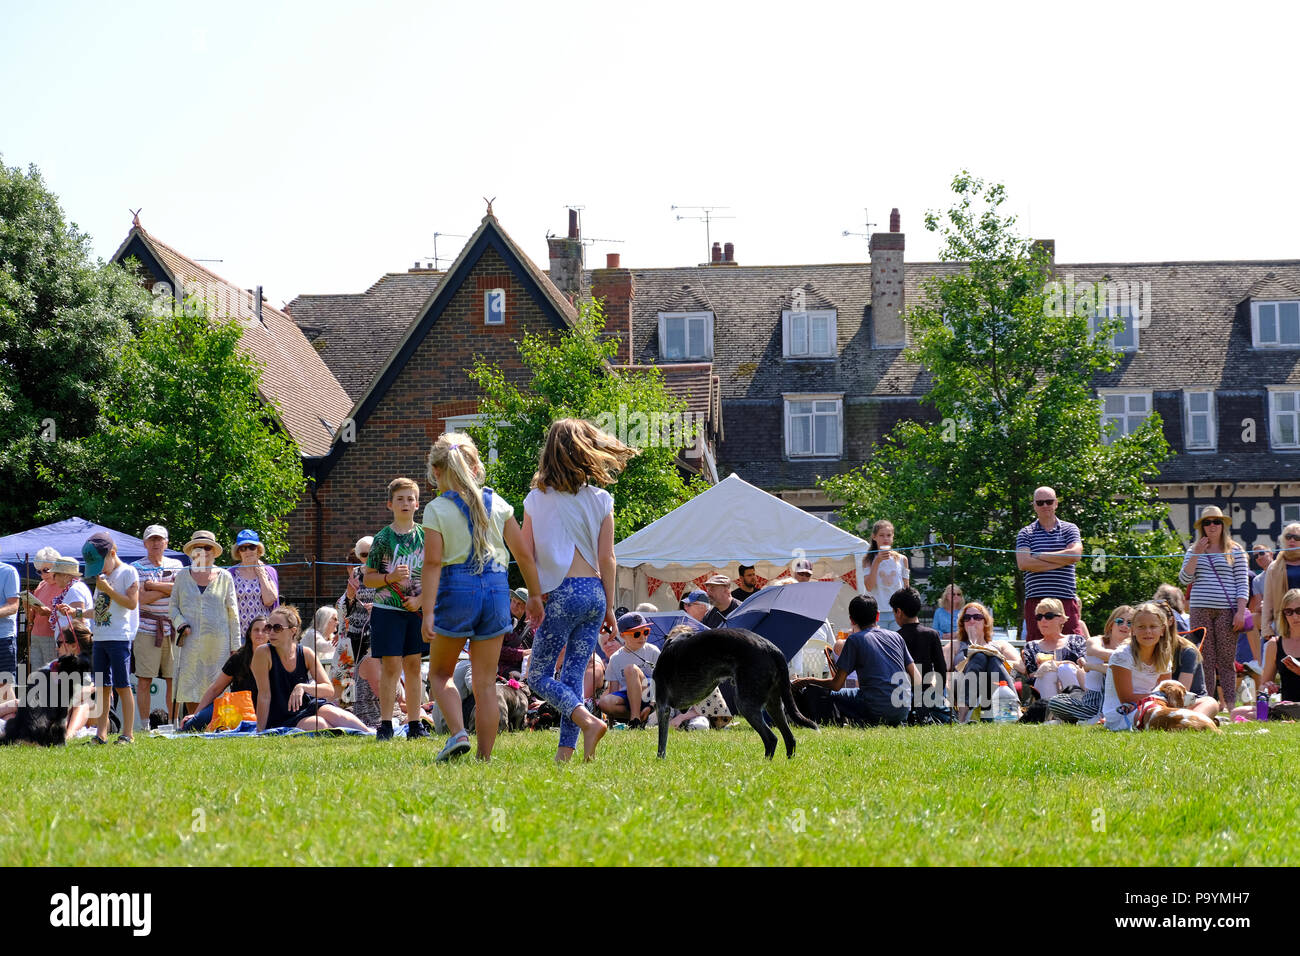 East Preston, West Sussex, UK. Fun dog show held on village green. Young girls showing their pet three legged dog. Stock Photo